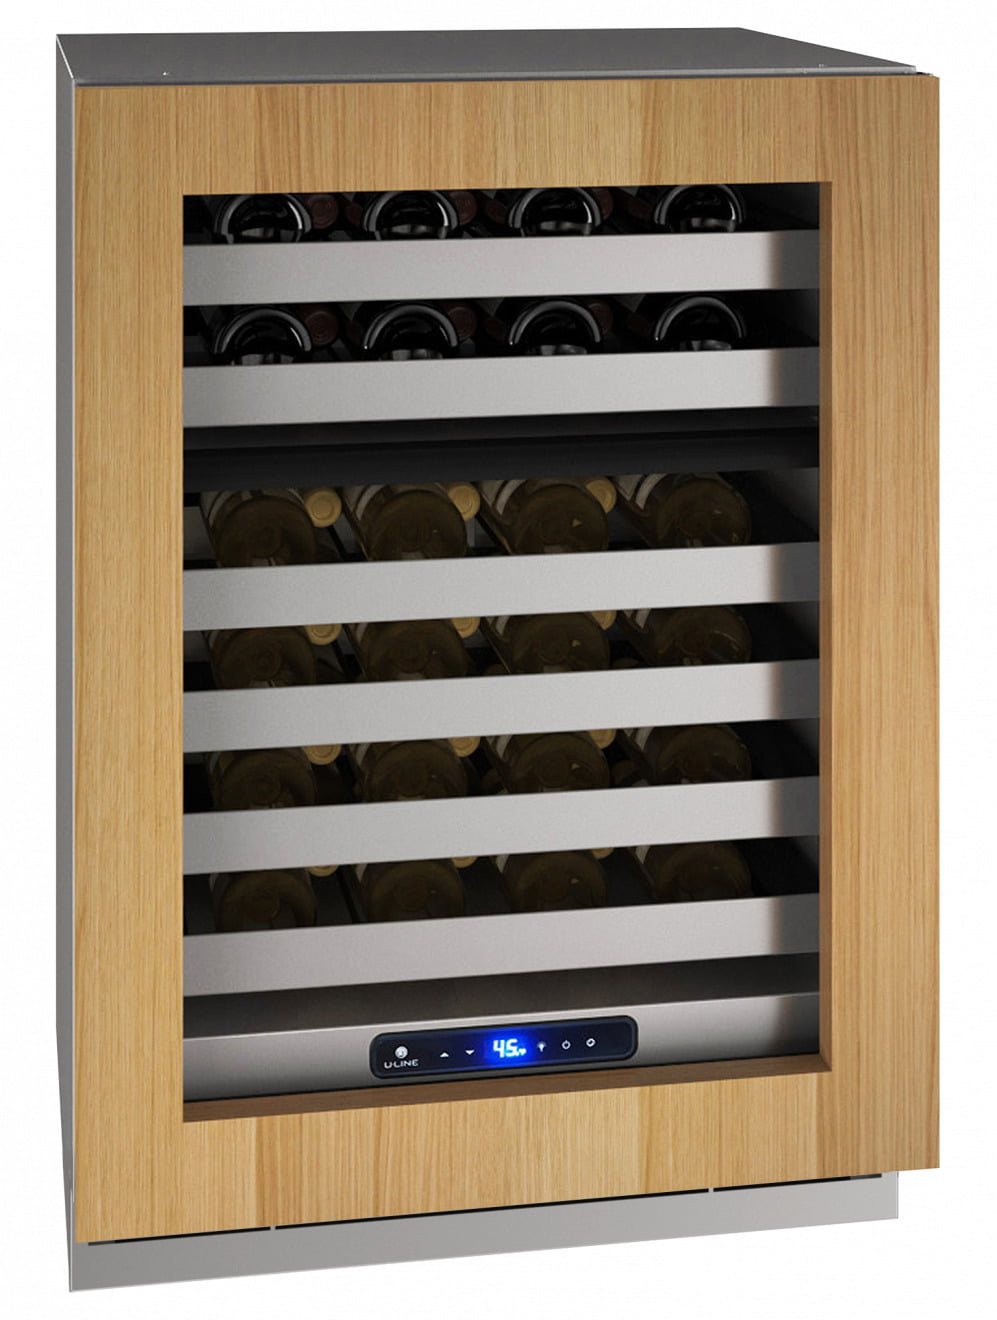 U-Line UHWD524IG01A Hwd524 24" Dual-Zone Wine Refrigerator With Integrated Frame Finish And Field Reversible Door Swing (115 V/60 Hz Volts /60 Hz Hz)